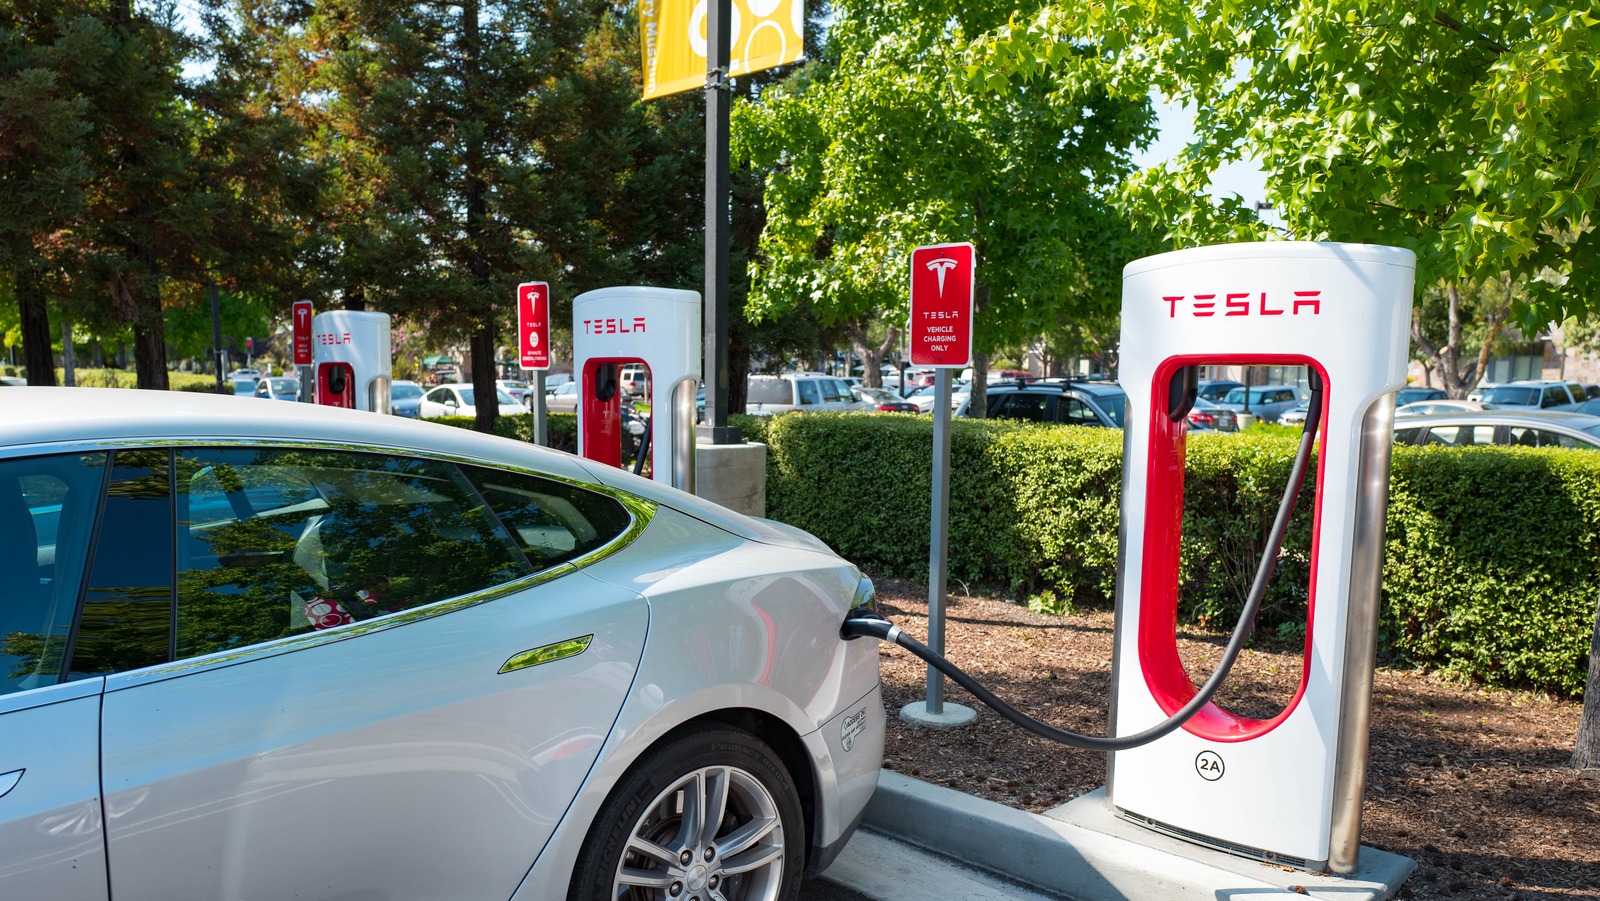 Does Cold Weather Hurt Or Help Tesla Batteries? This New Study Found The Answer